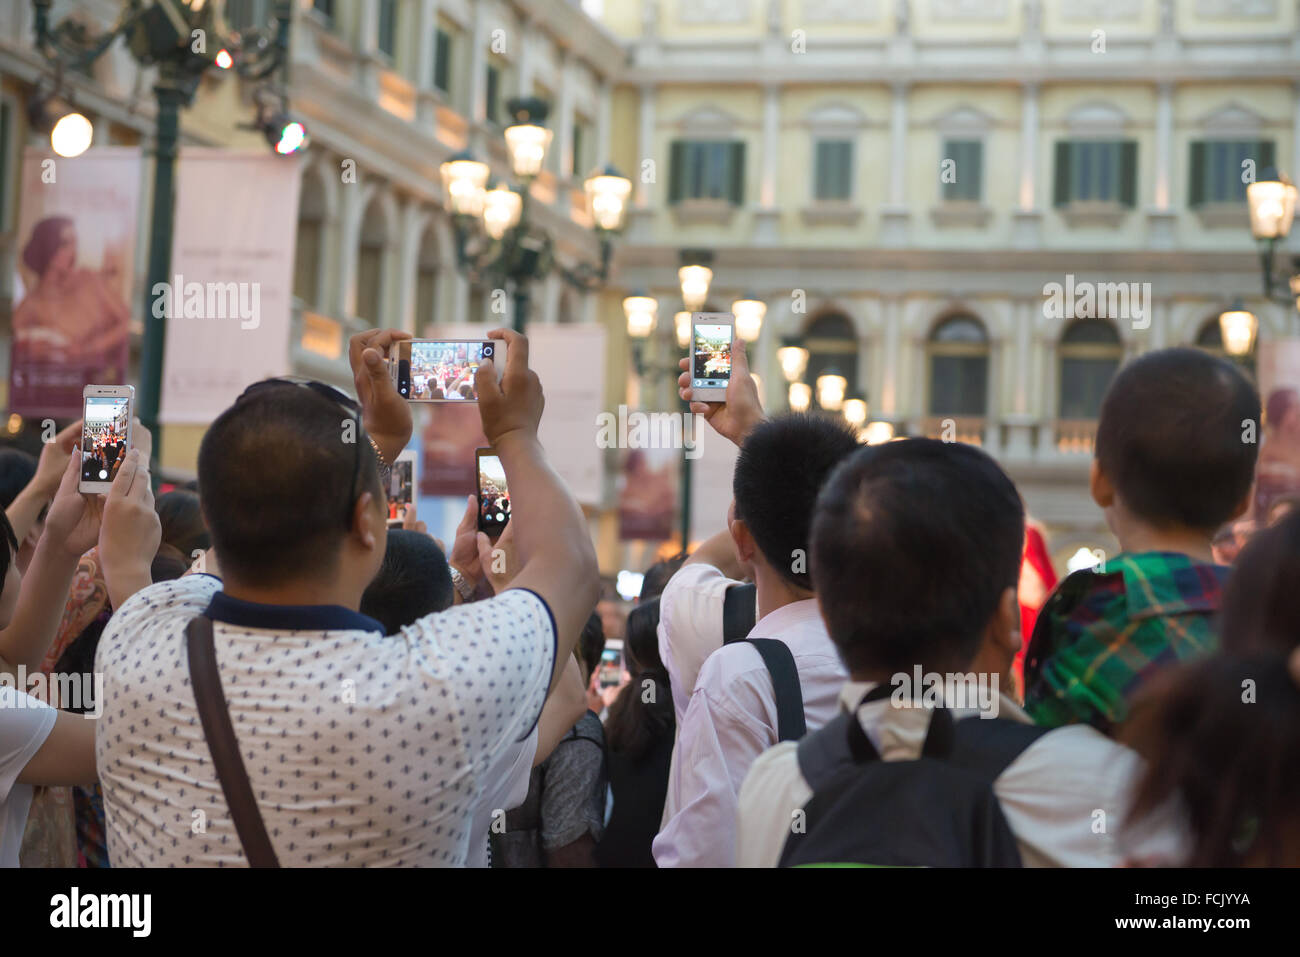 Macao, China - June 25, 2015:People watching a live show taking photos and videos in Venetian Hotel, Macao on June 25, 2015. The Stock Photo